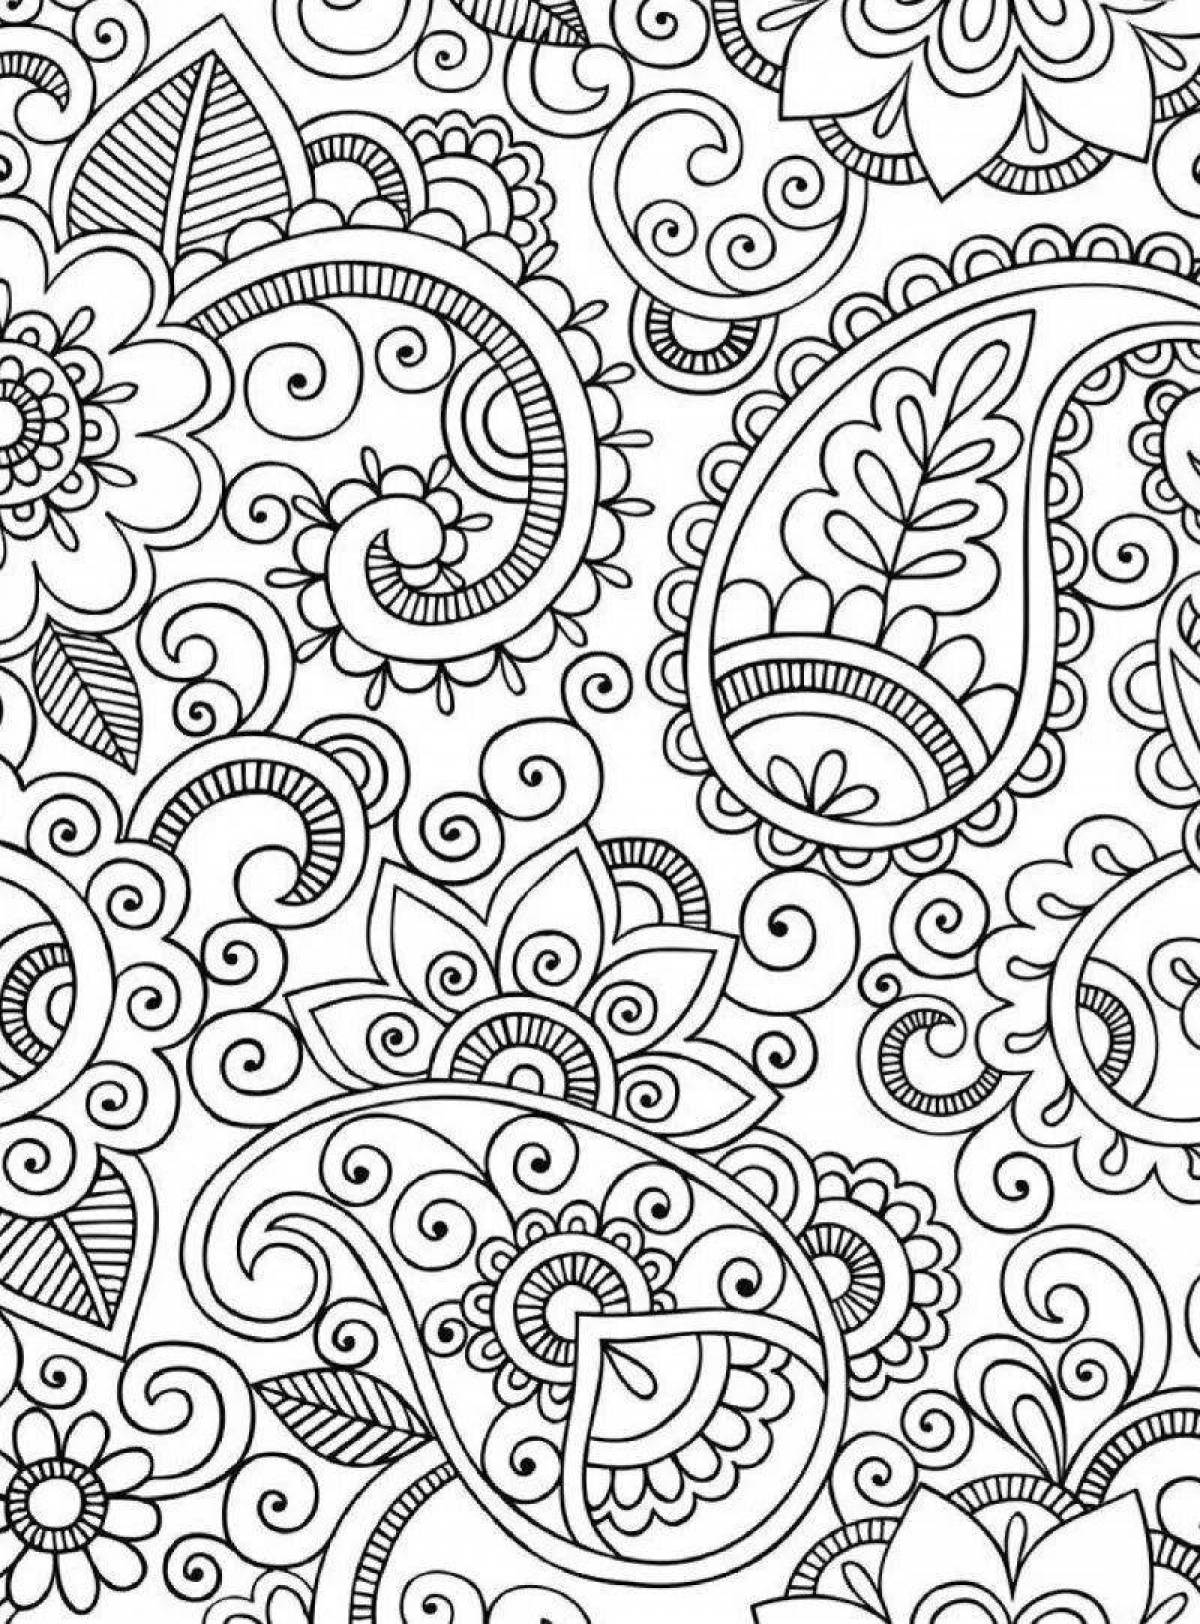 Mystical coloring relax living patterns